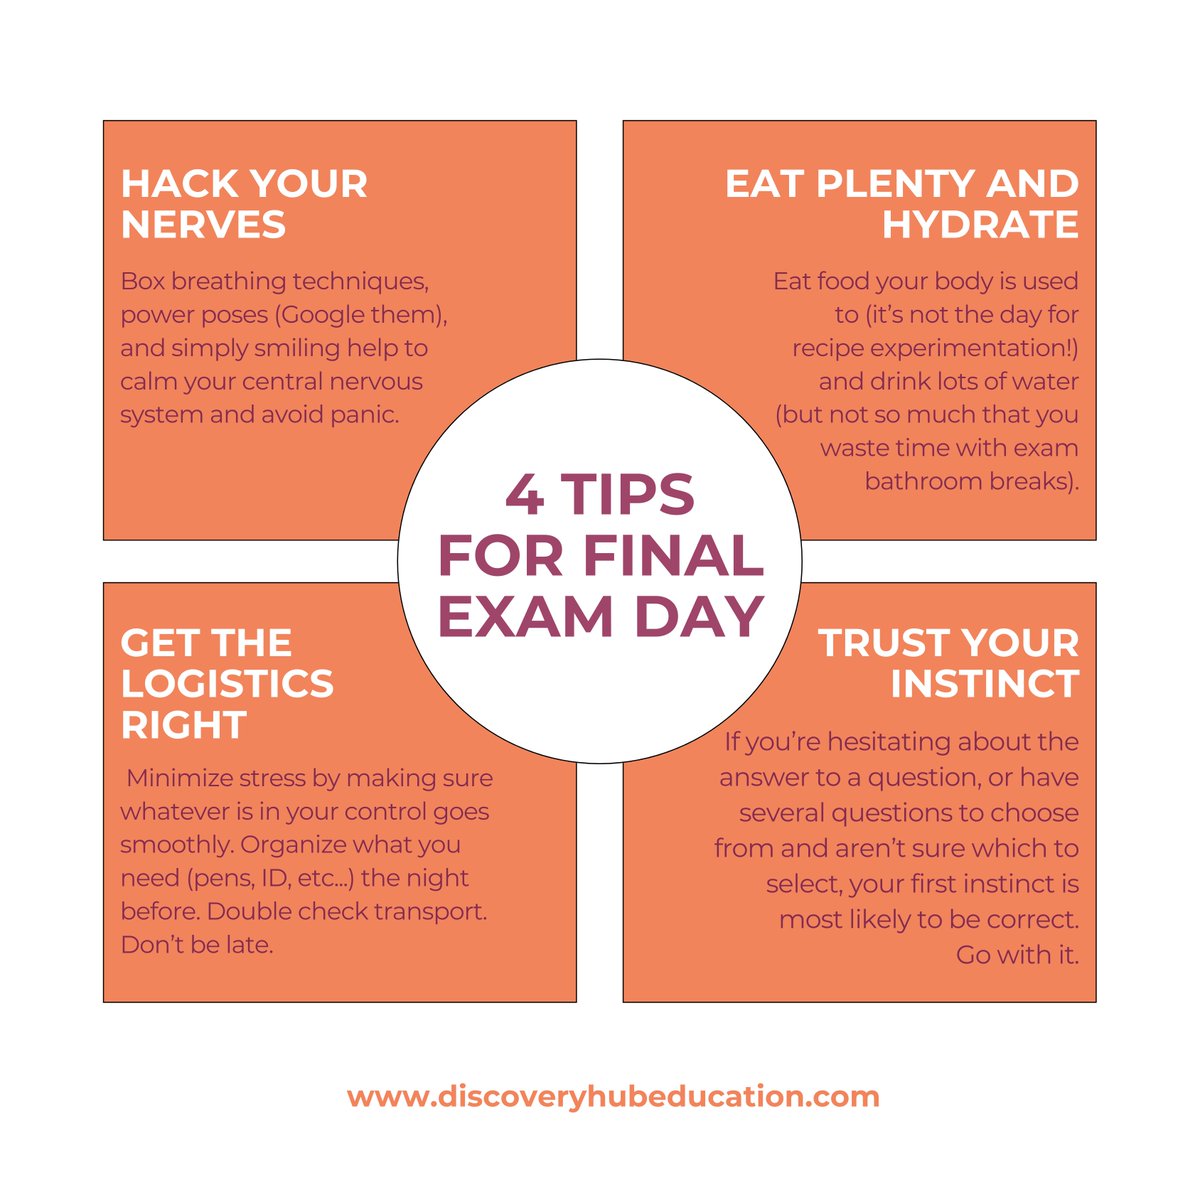 Final exams are here! Check out these four simple tips to perform at your best in finals 🥇
#academicsuccess #exams #study #finalsweek #beatstress